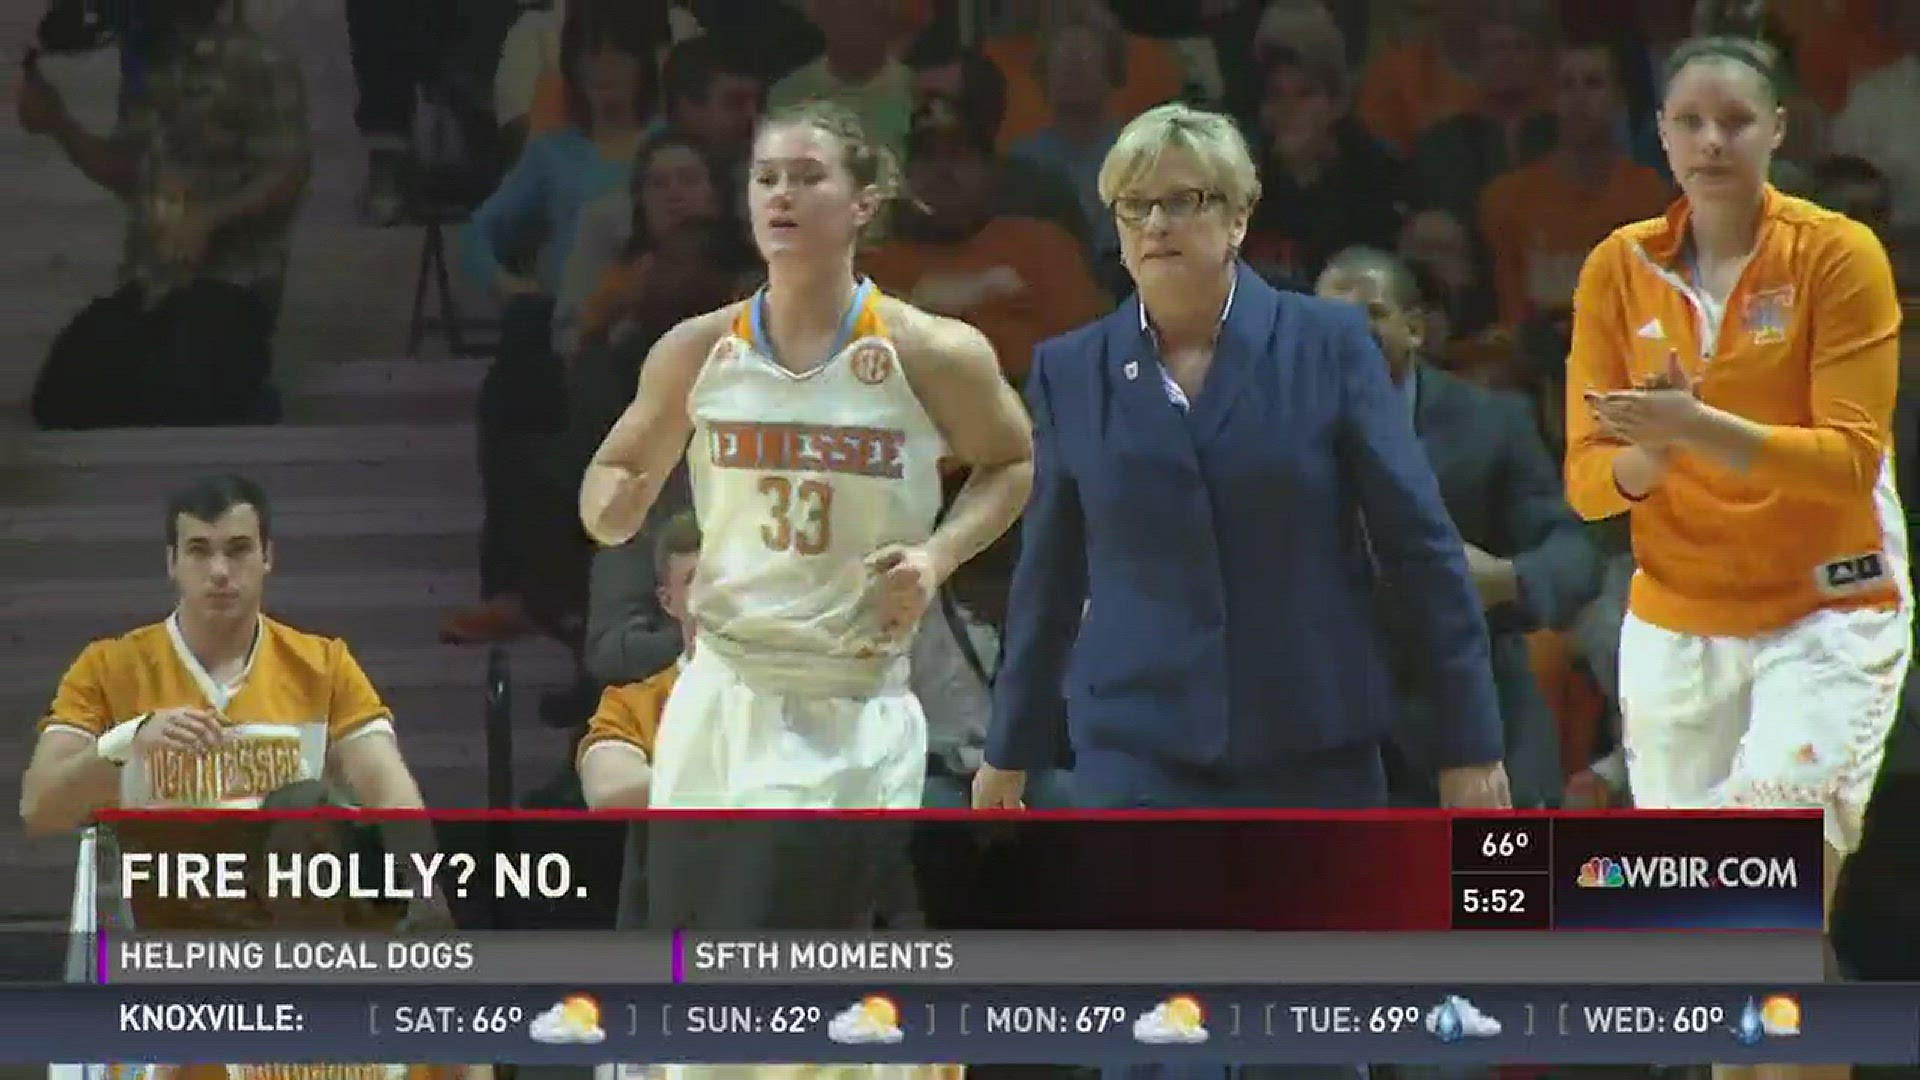 Many fans were angry after the Lady Vols loss to Ole Miss Thursday night. Some expressed they wanted Holly Warlick fired. WBIR 10Sports Anchor Patrick Murray gives his opinion on the situation, comparing Holly to her peers.